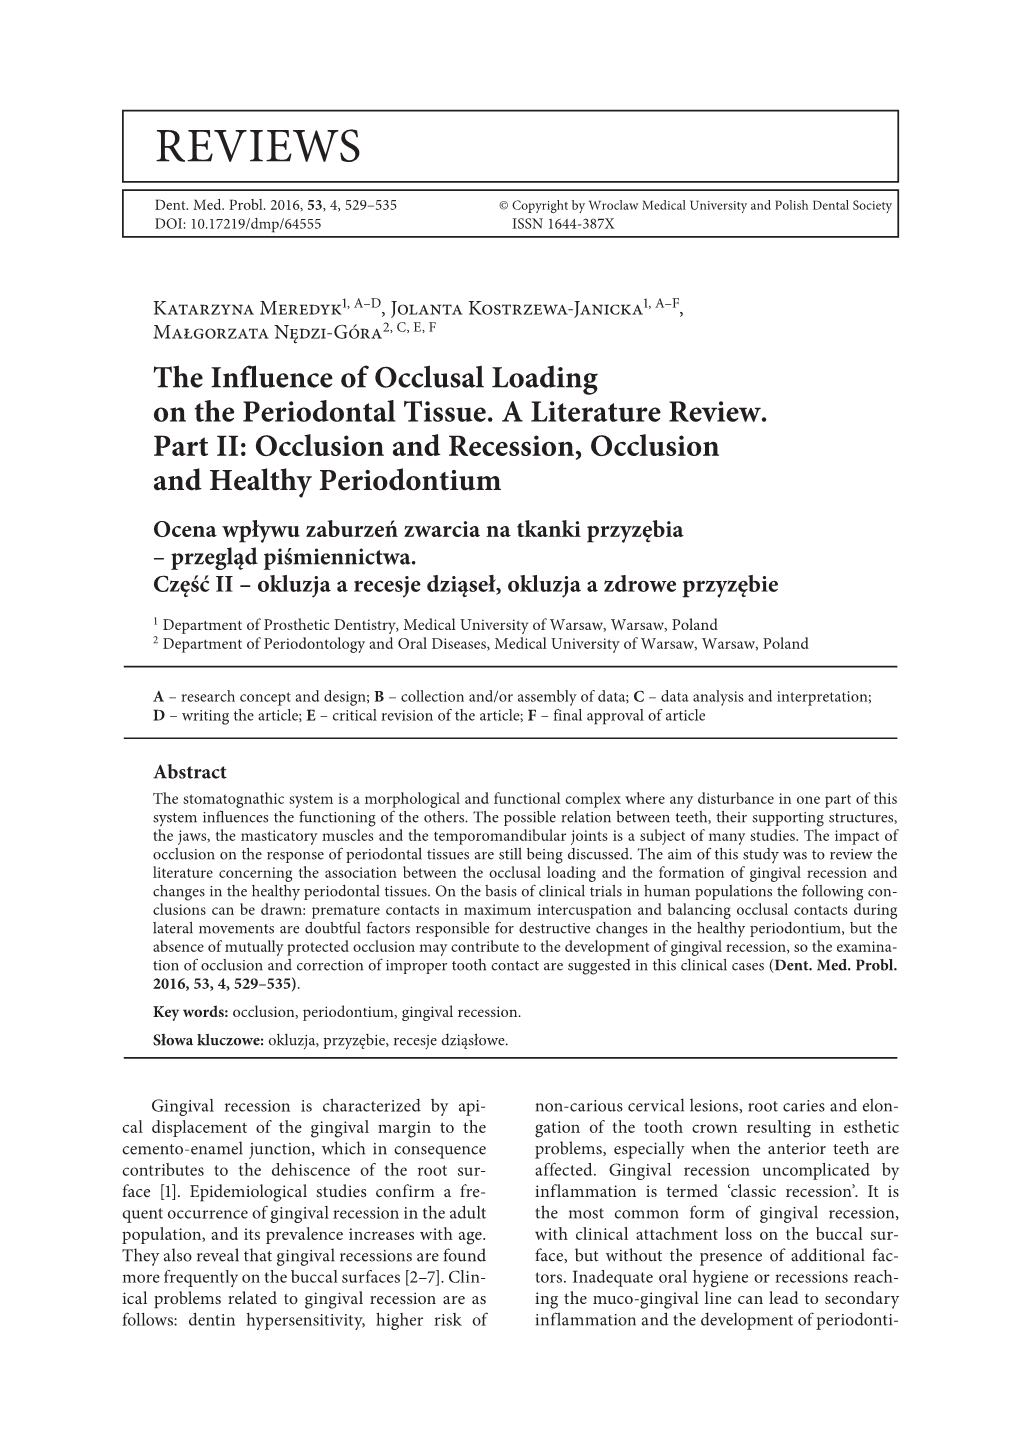 The Influence of Occlusal Loading on the Periodontal Tissue. a Literature Review